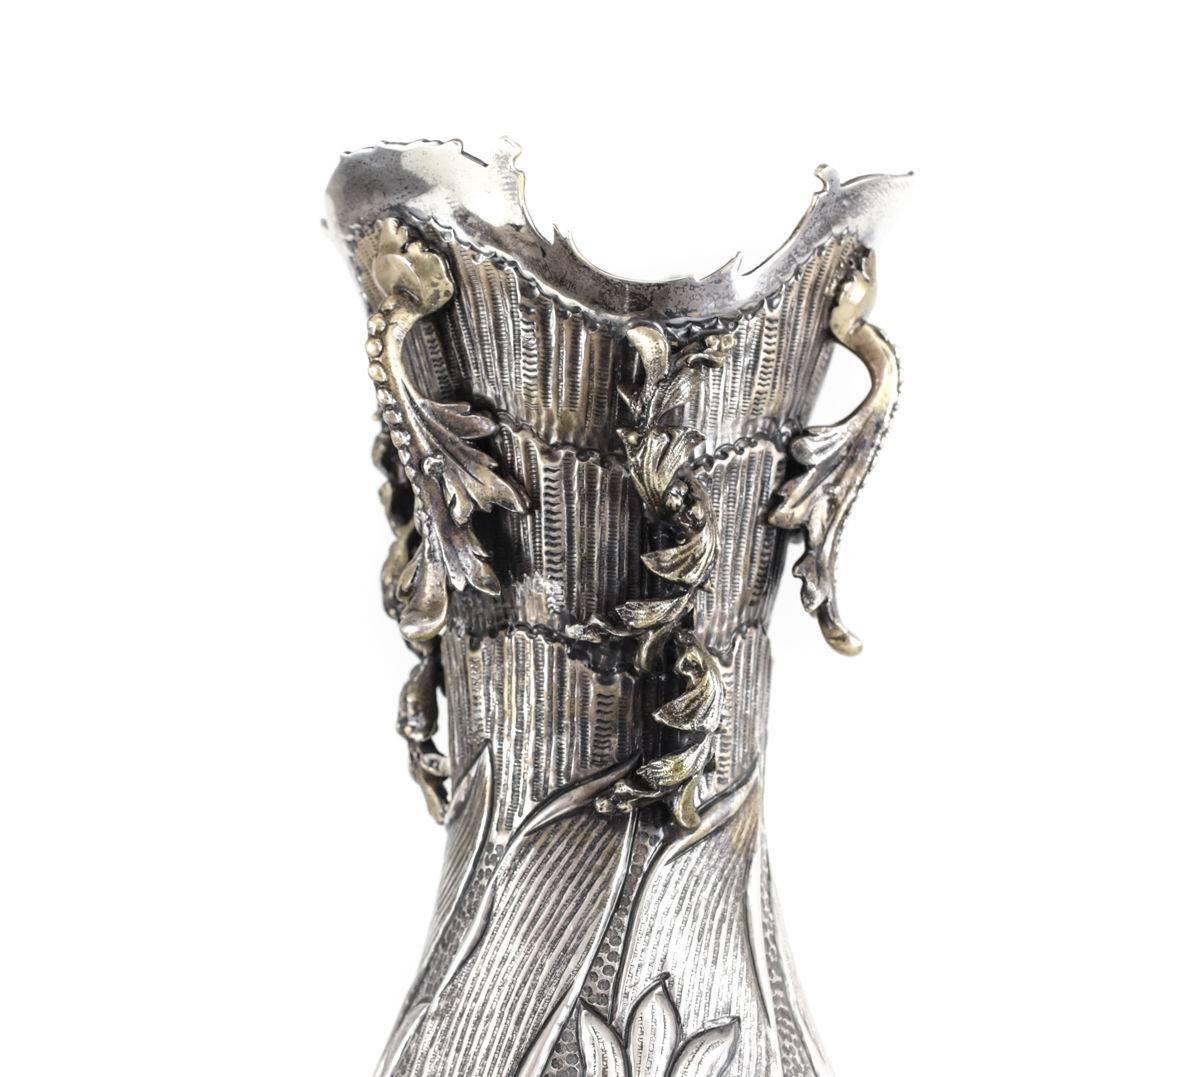 Continental 900 silver footed vase from the transitional Art Nouveau period. Niello throughout the hand-hammered vase with hand chased florals to the body and applied acanthus leaves towards the rim and base. Maker's mark 